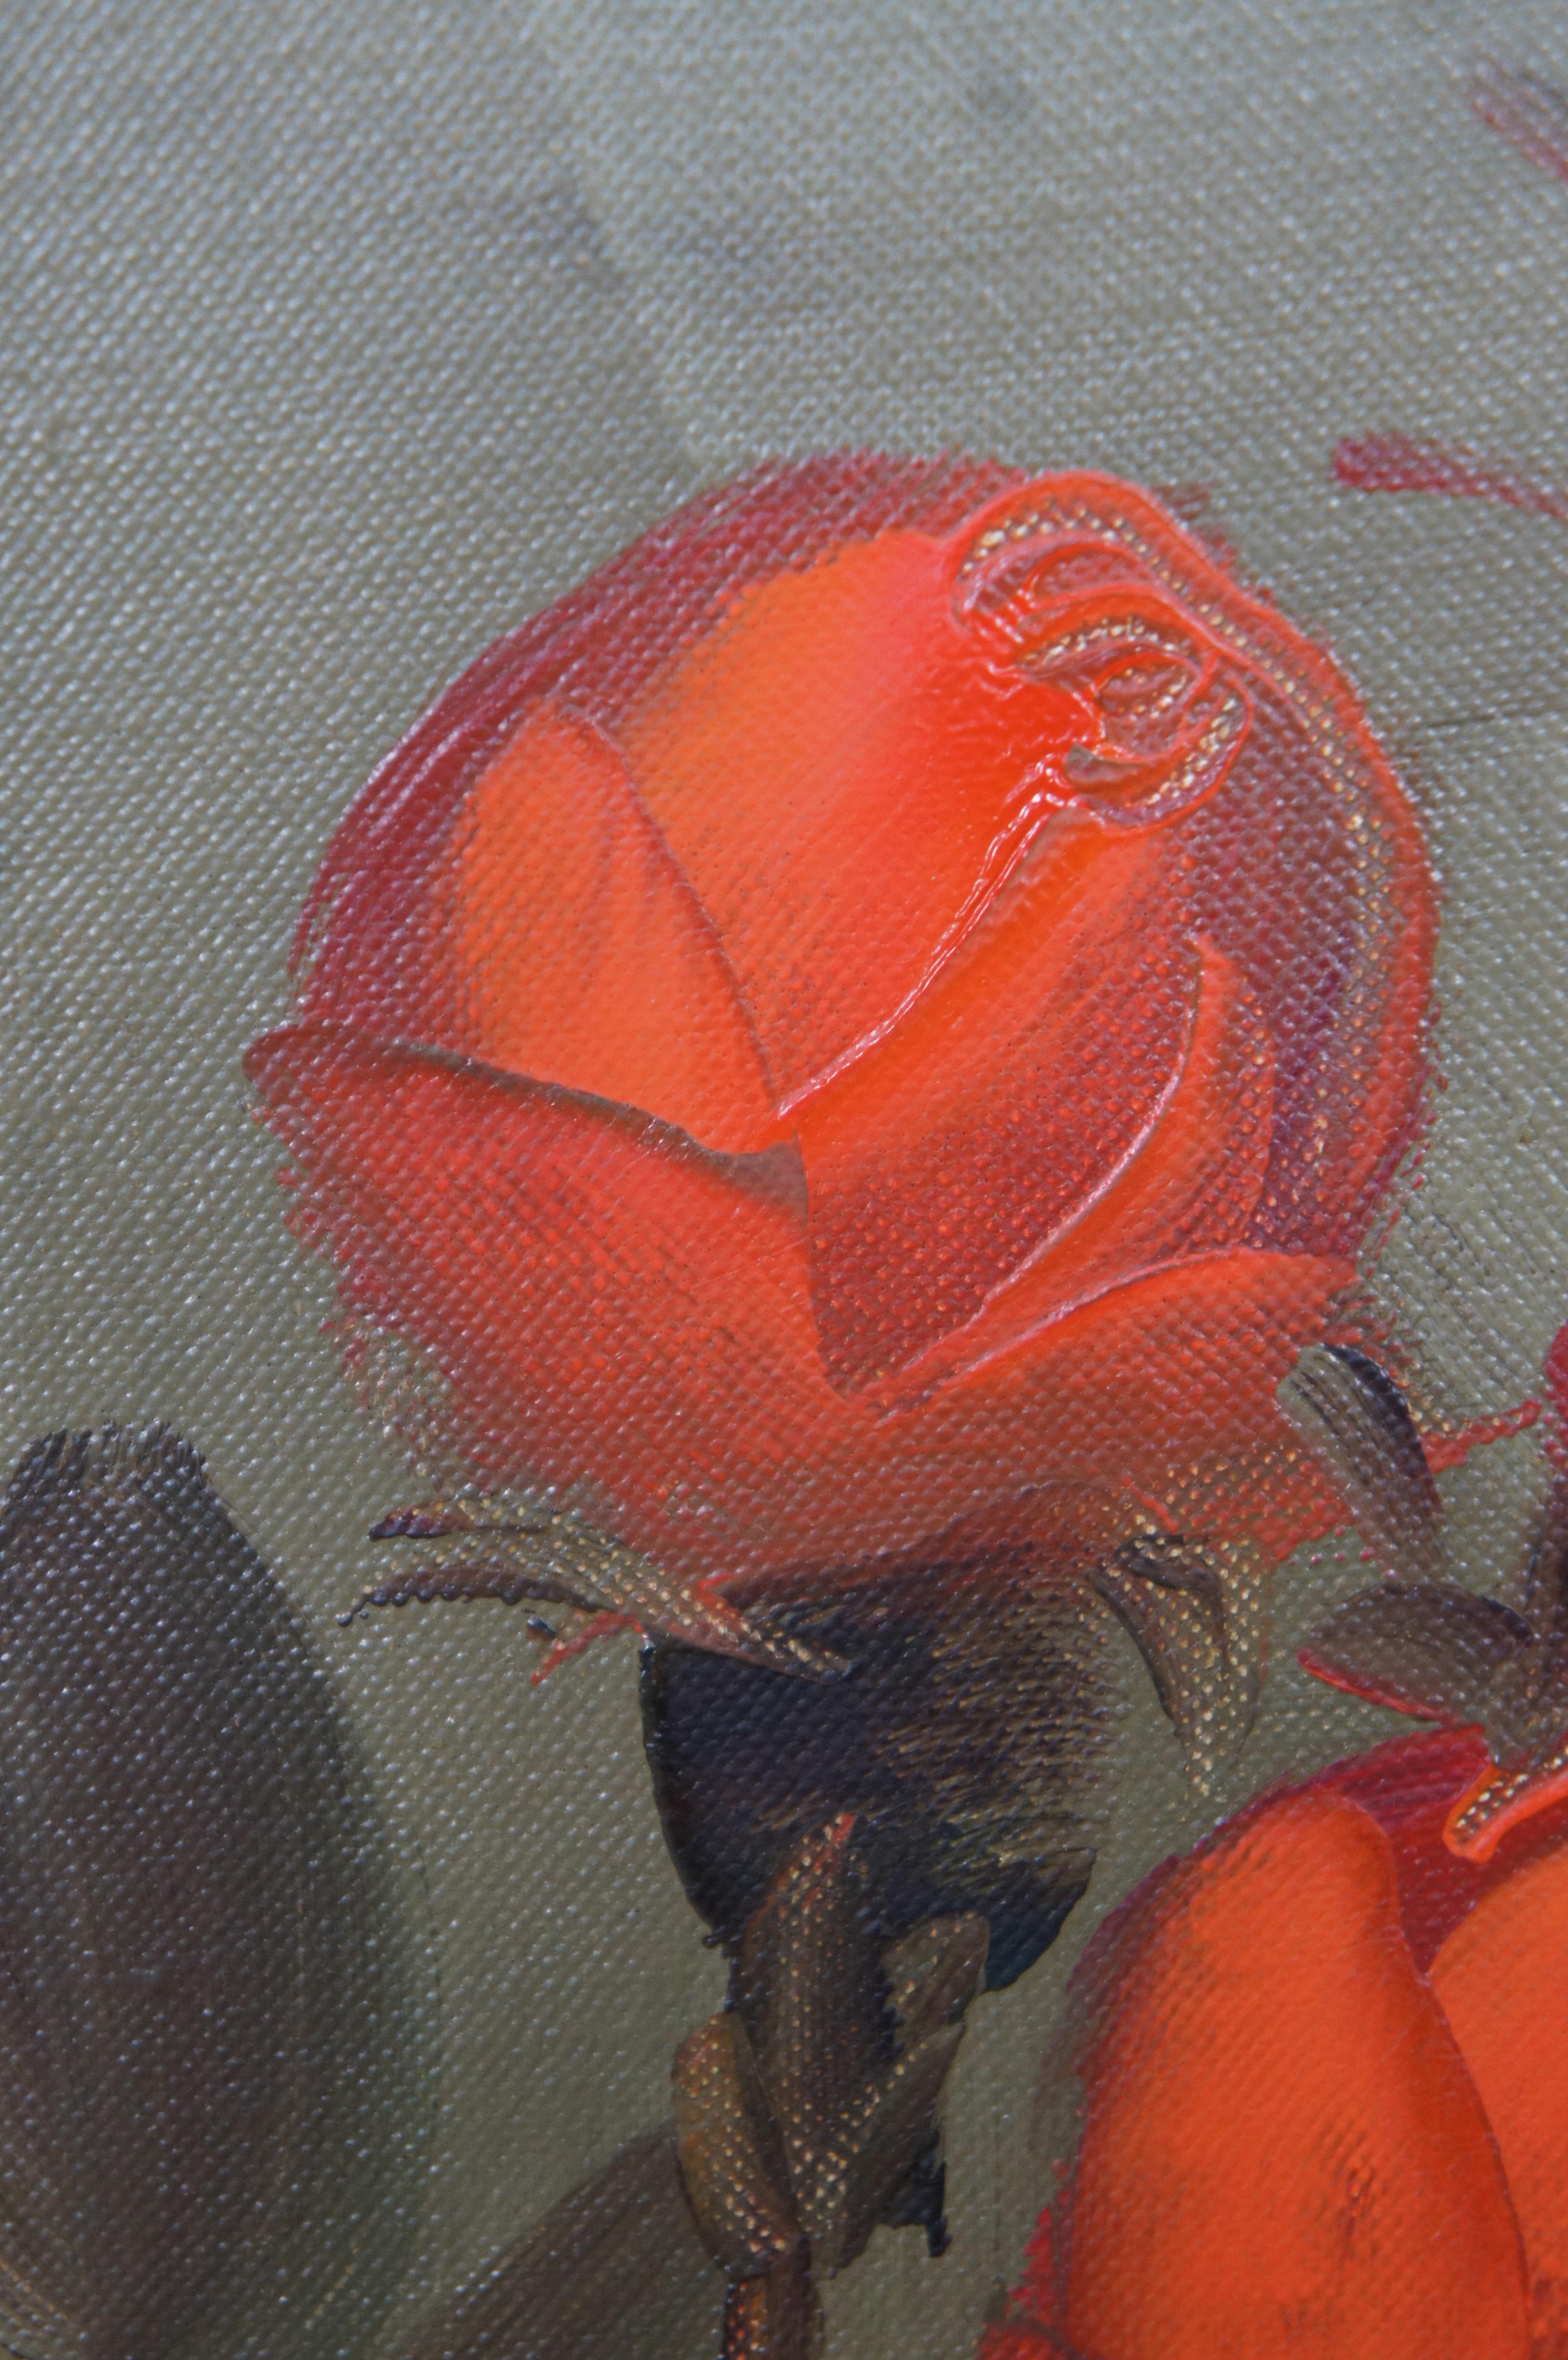 Wood Vintage Suzanne Floral Still Life Oil Painting on Canvas Orange Rose Bouquet For Sale